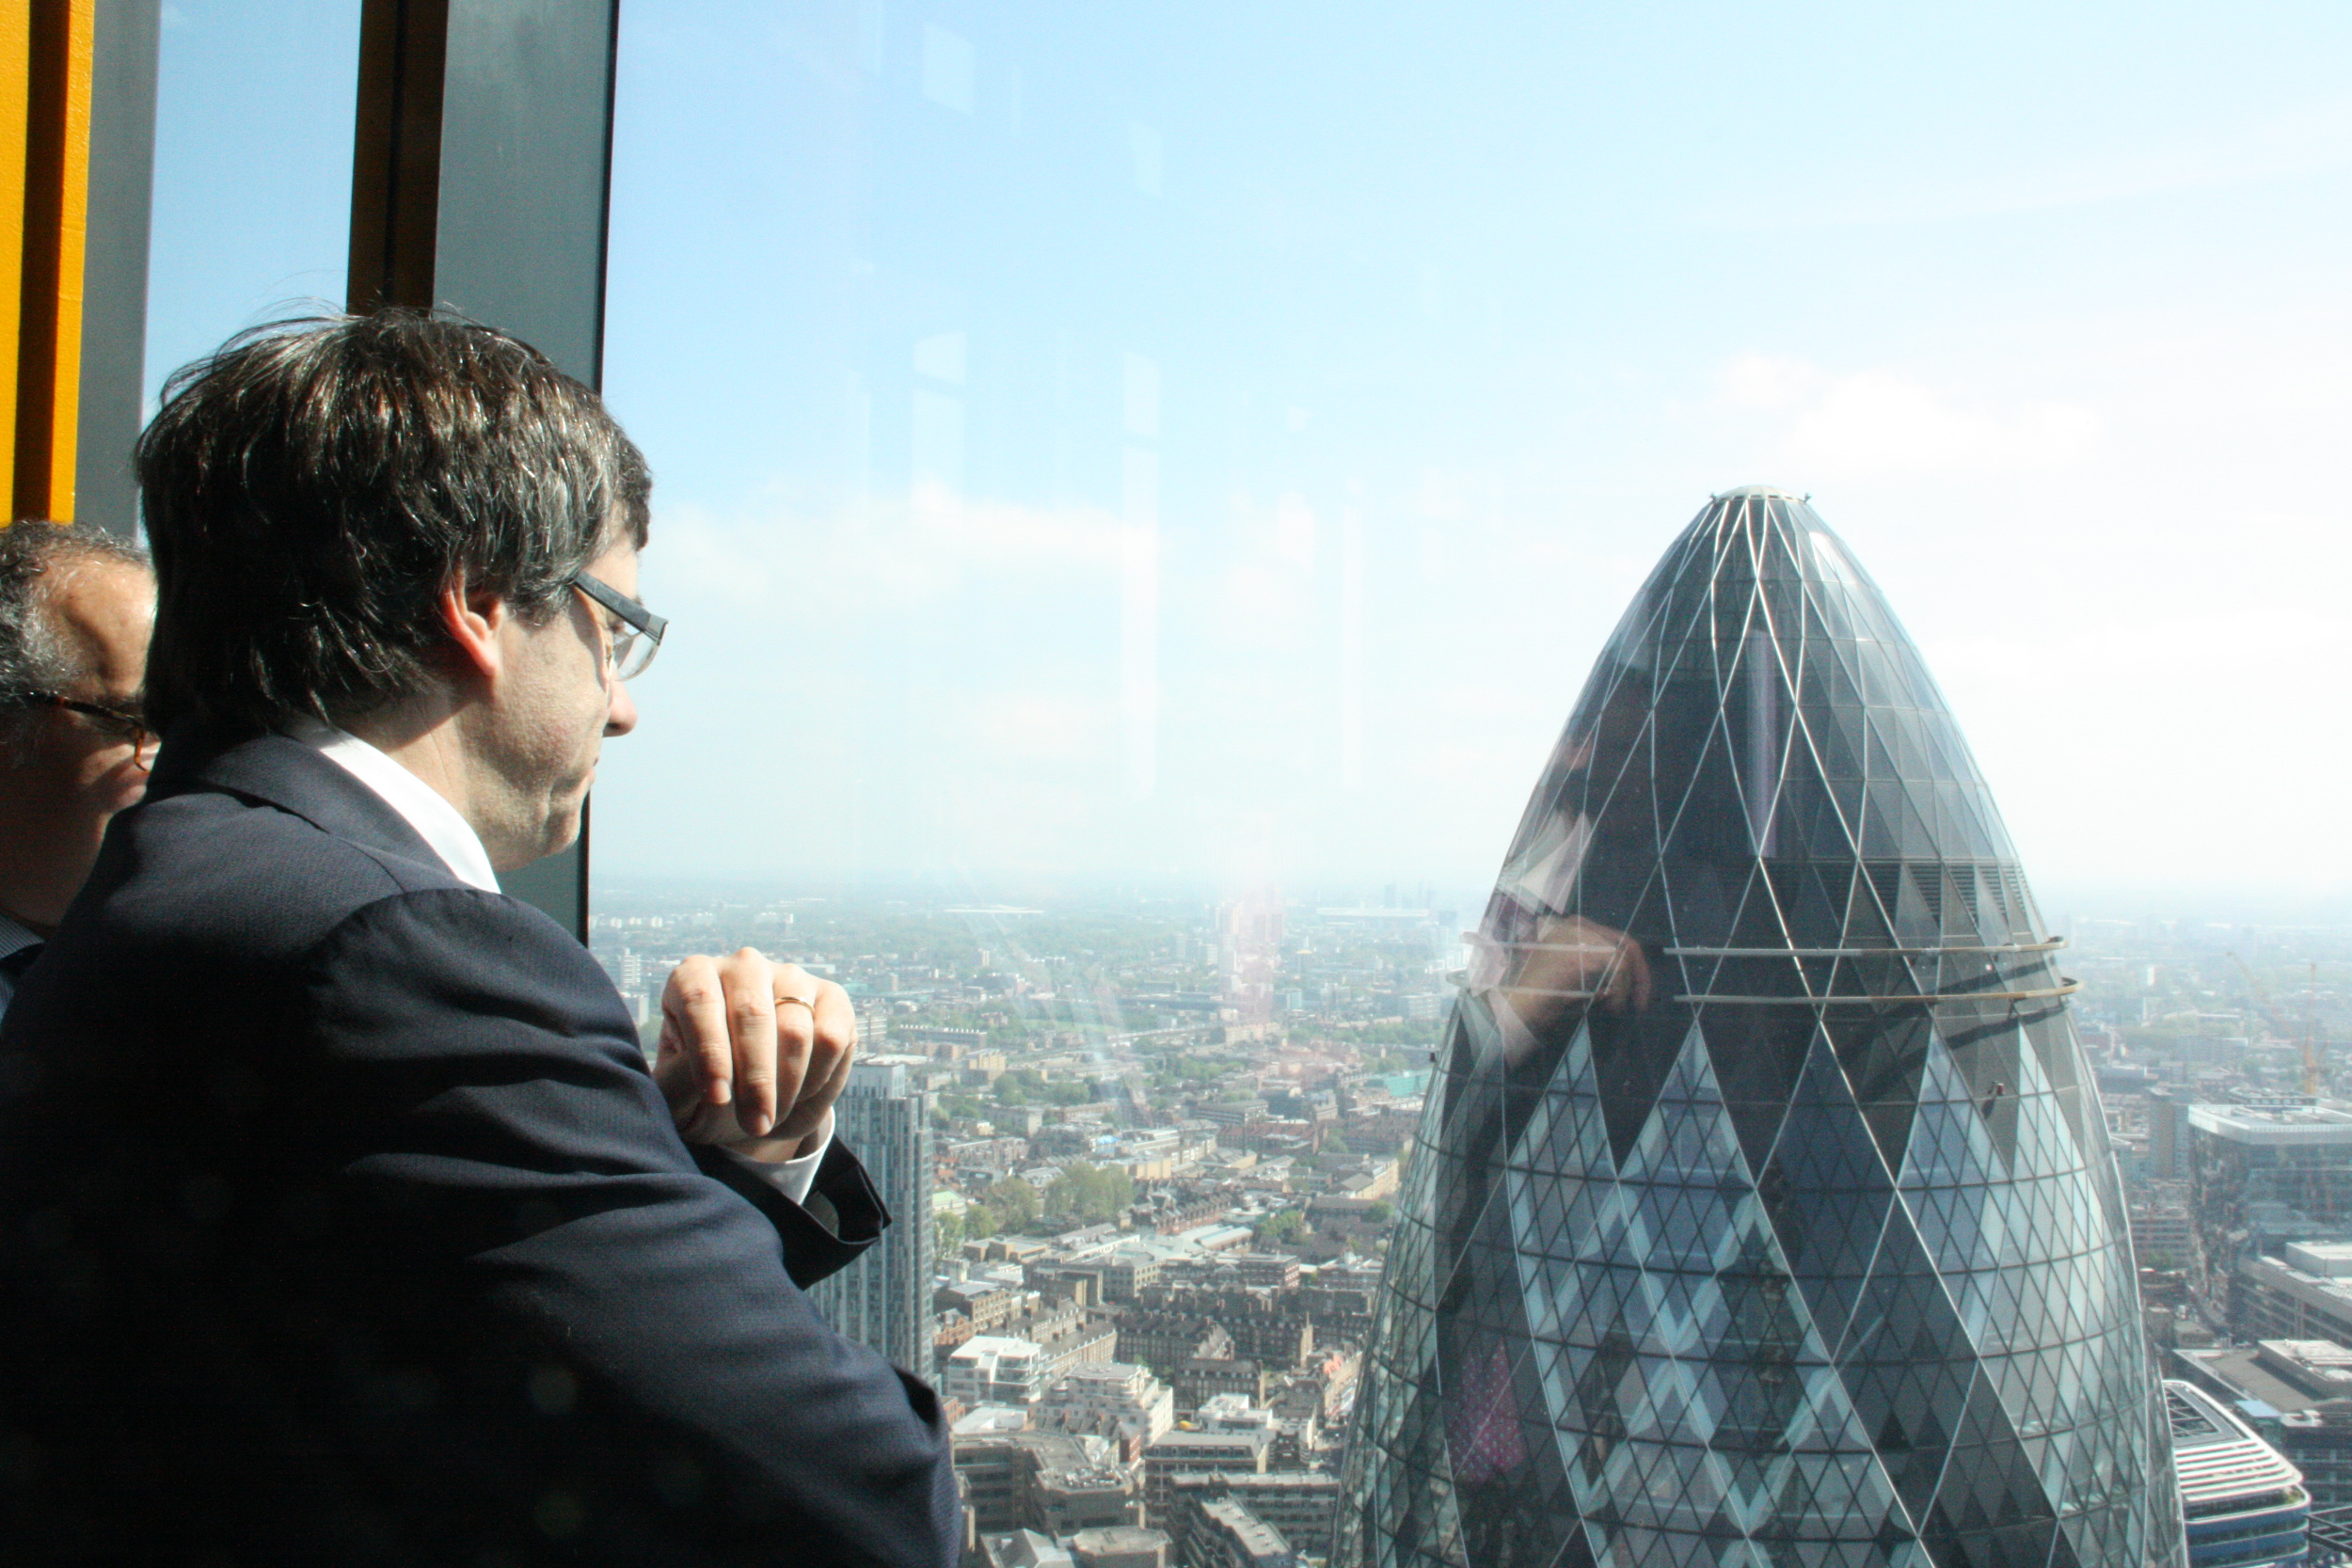 Catalan President, Carles Puigdemont, looking at London's skyline from 'Banc Sabadell' headquarters in The City